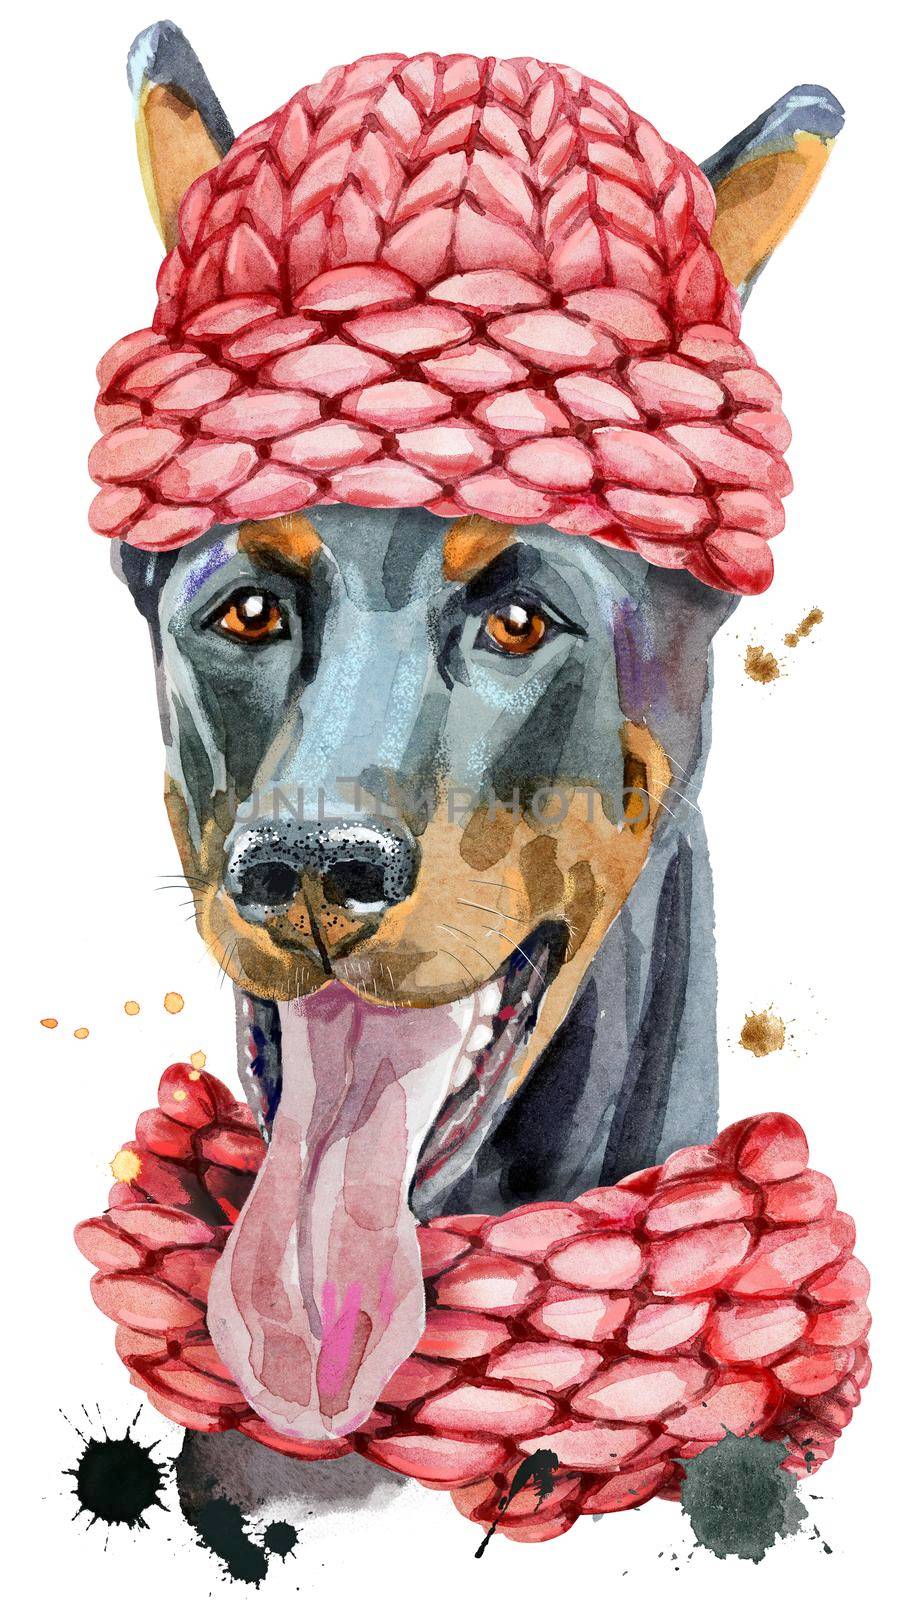 Cute Dog in a knitted hat. Dog T-shirt graphics. watercolor doberman illustration